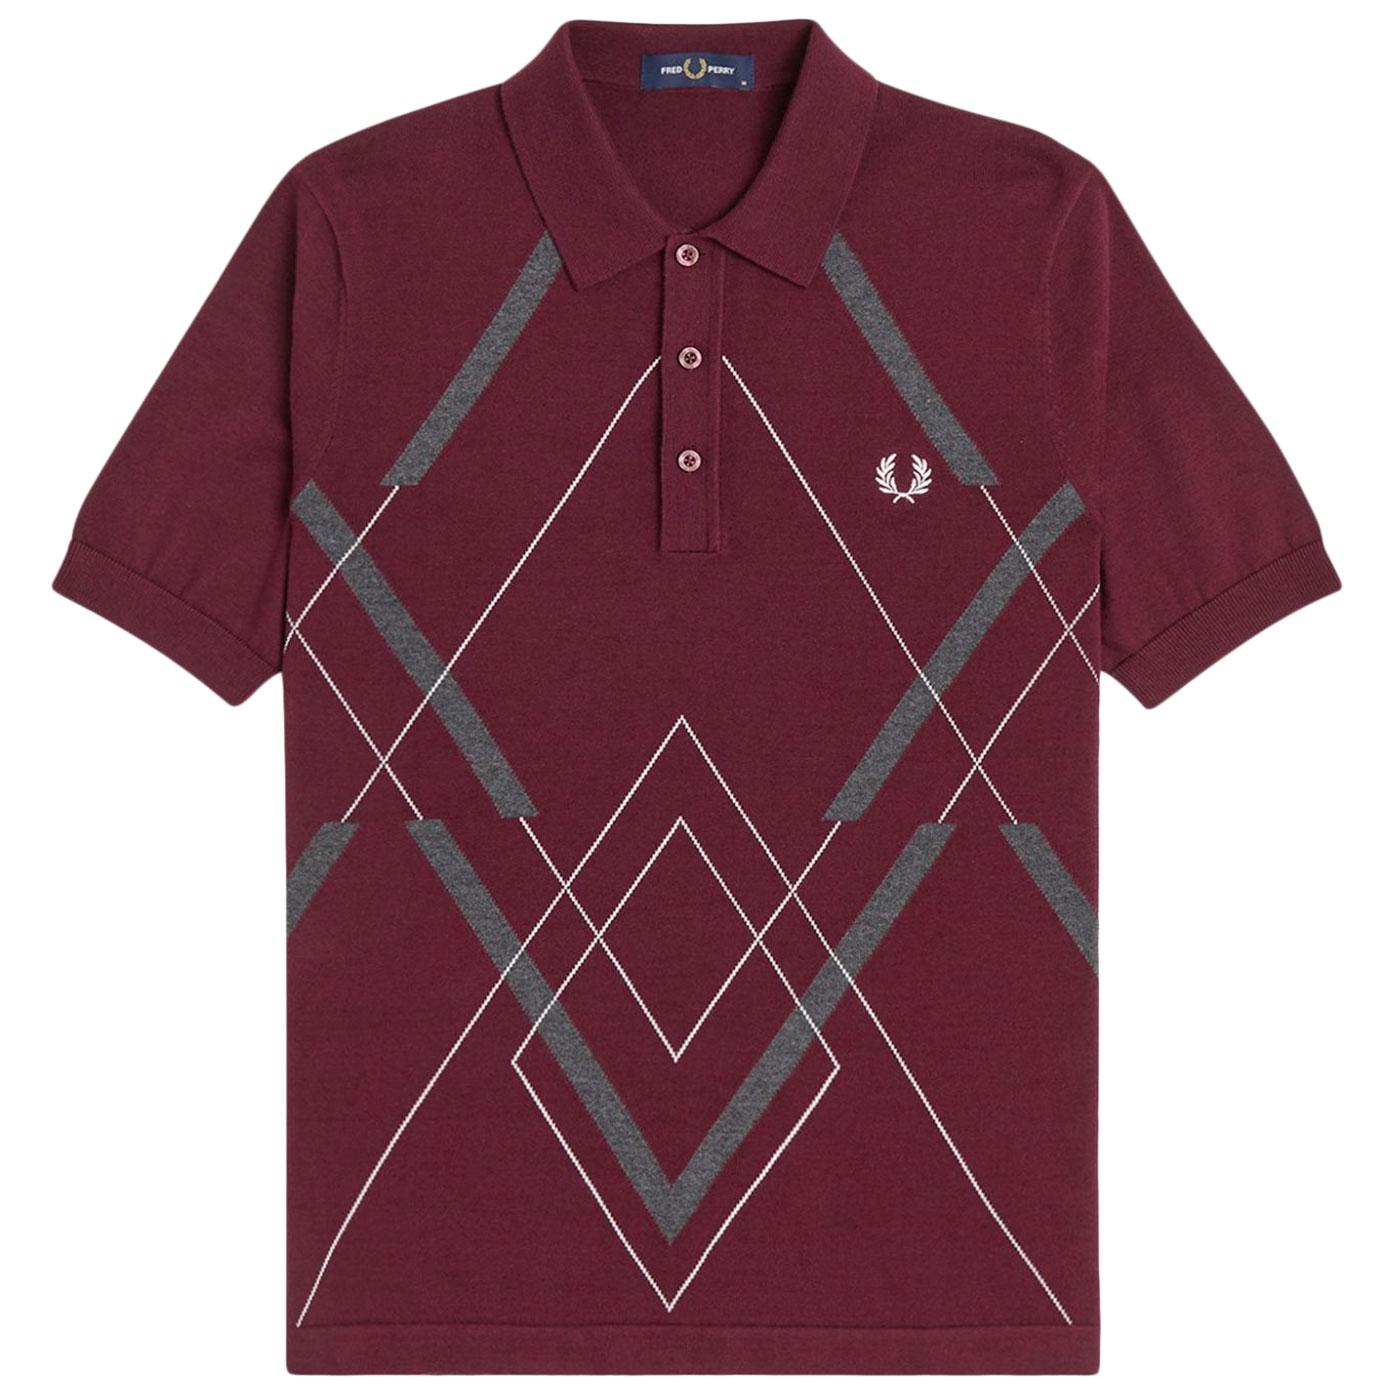 FRED PERRY K1535 Abstract Argyle Knit Polo Shirt